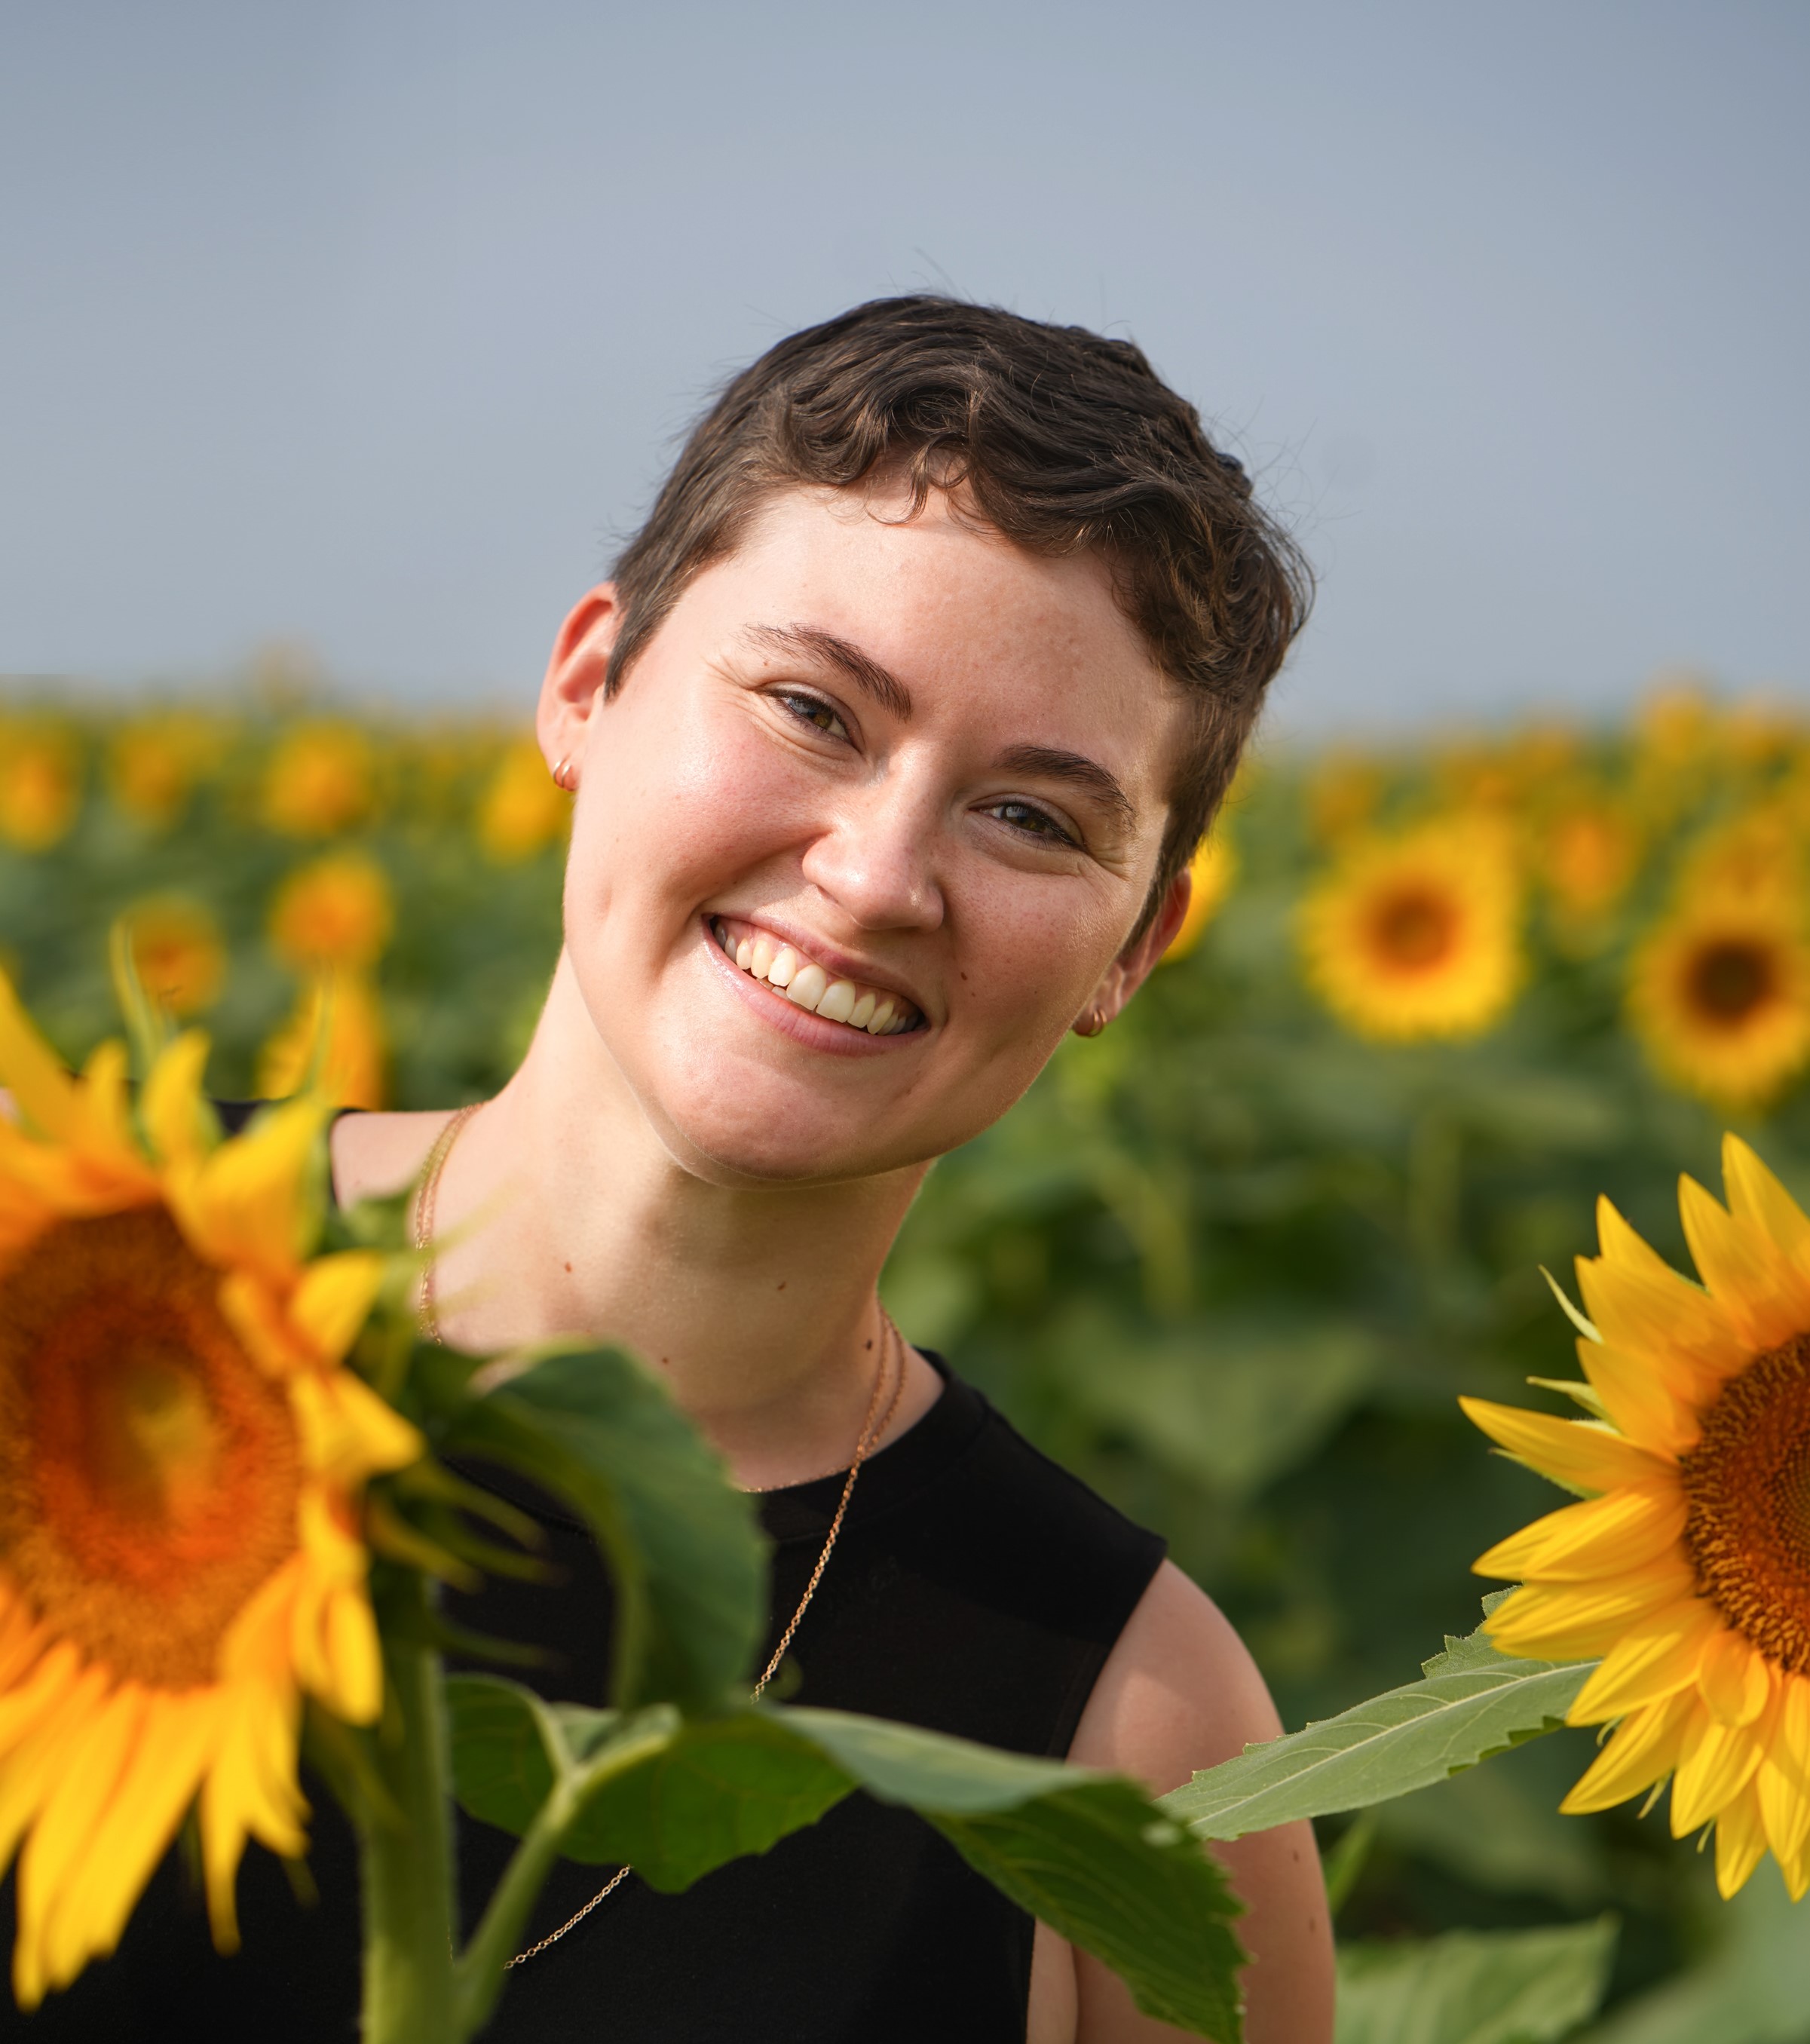 Pic of Sarah Kammeyer in a filed of sunflowers